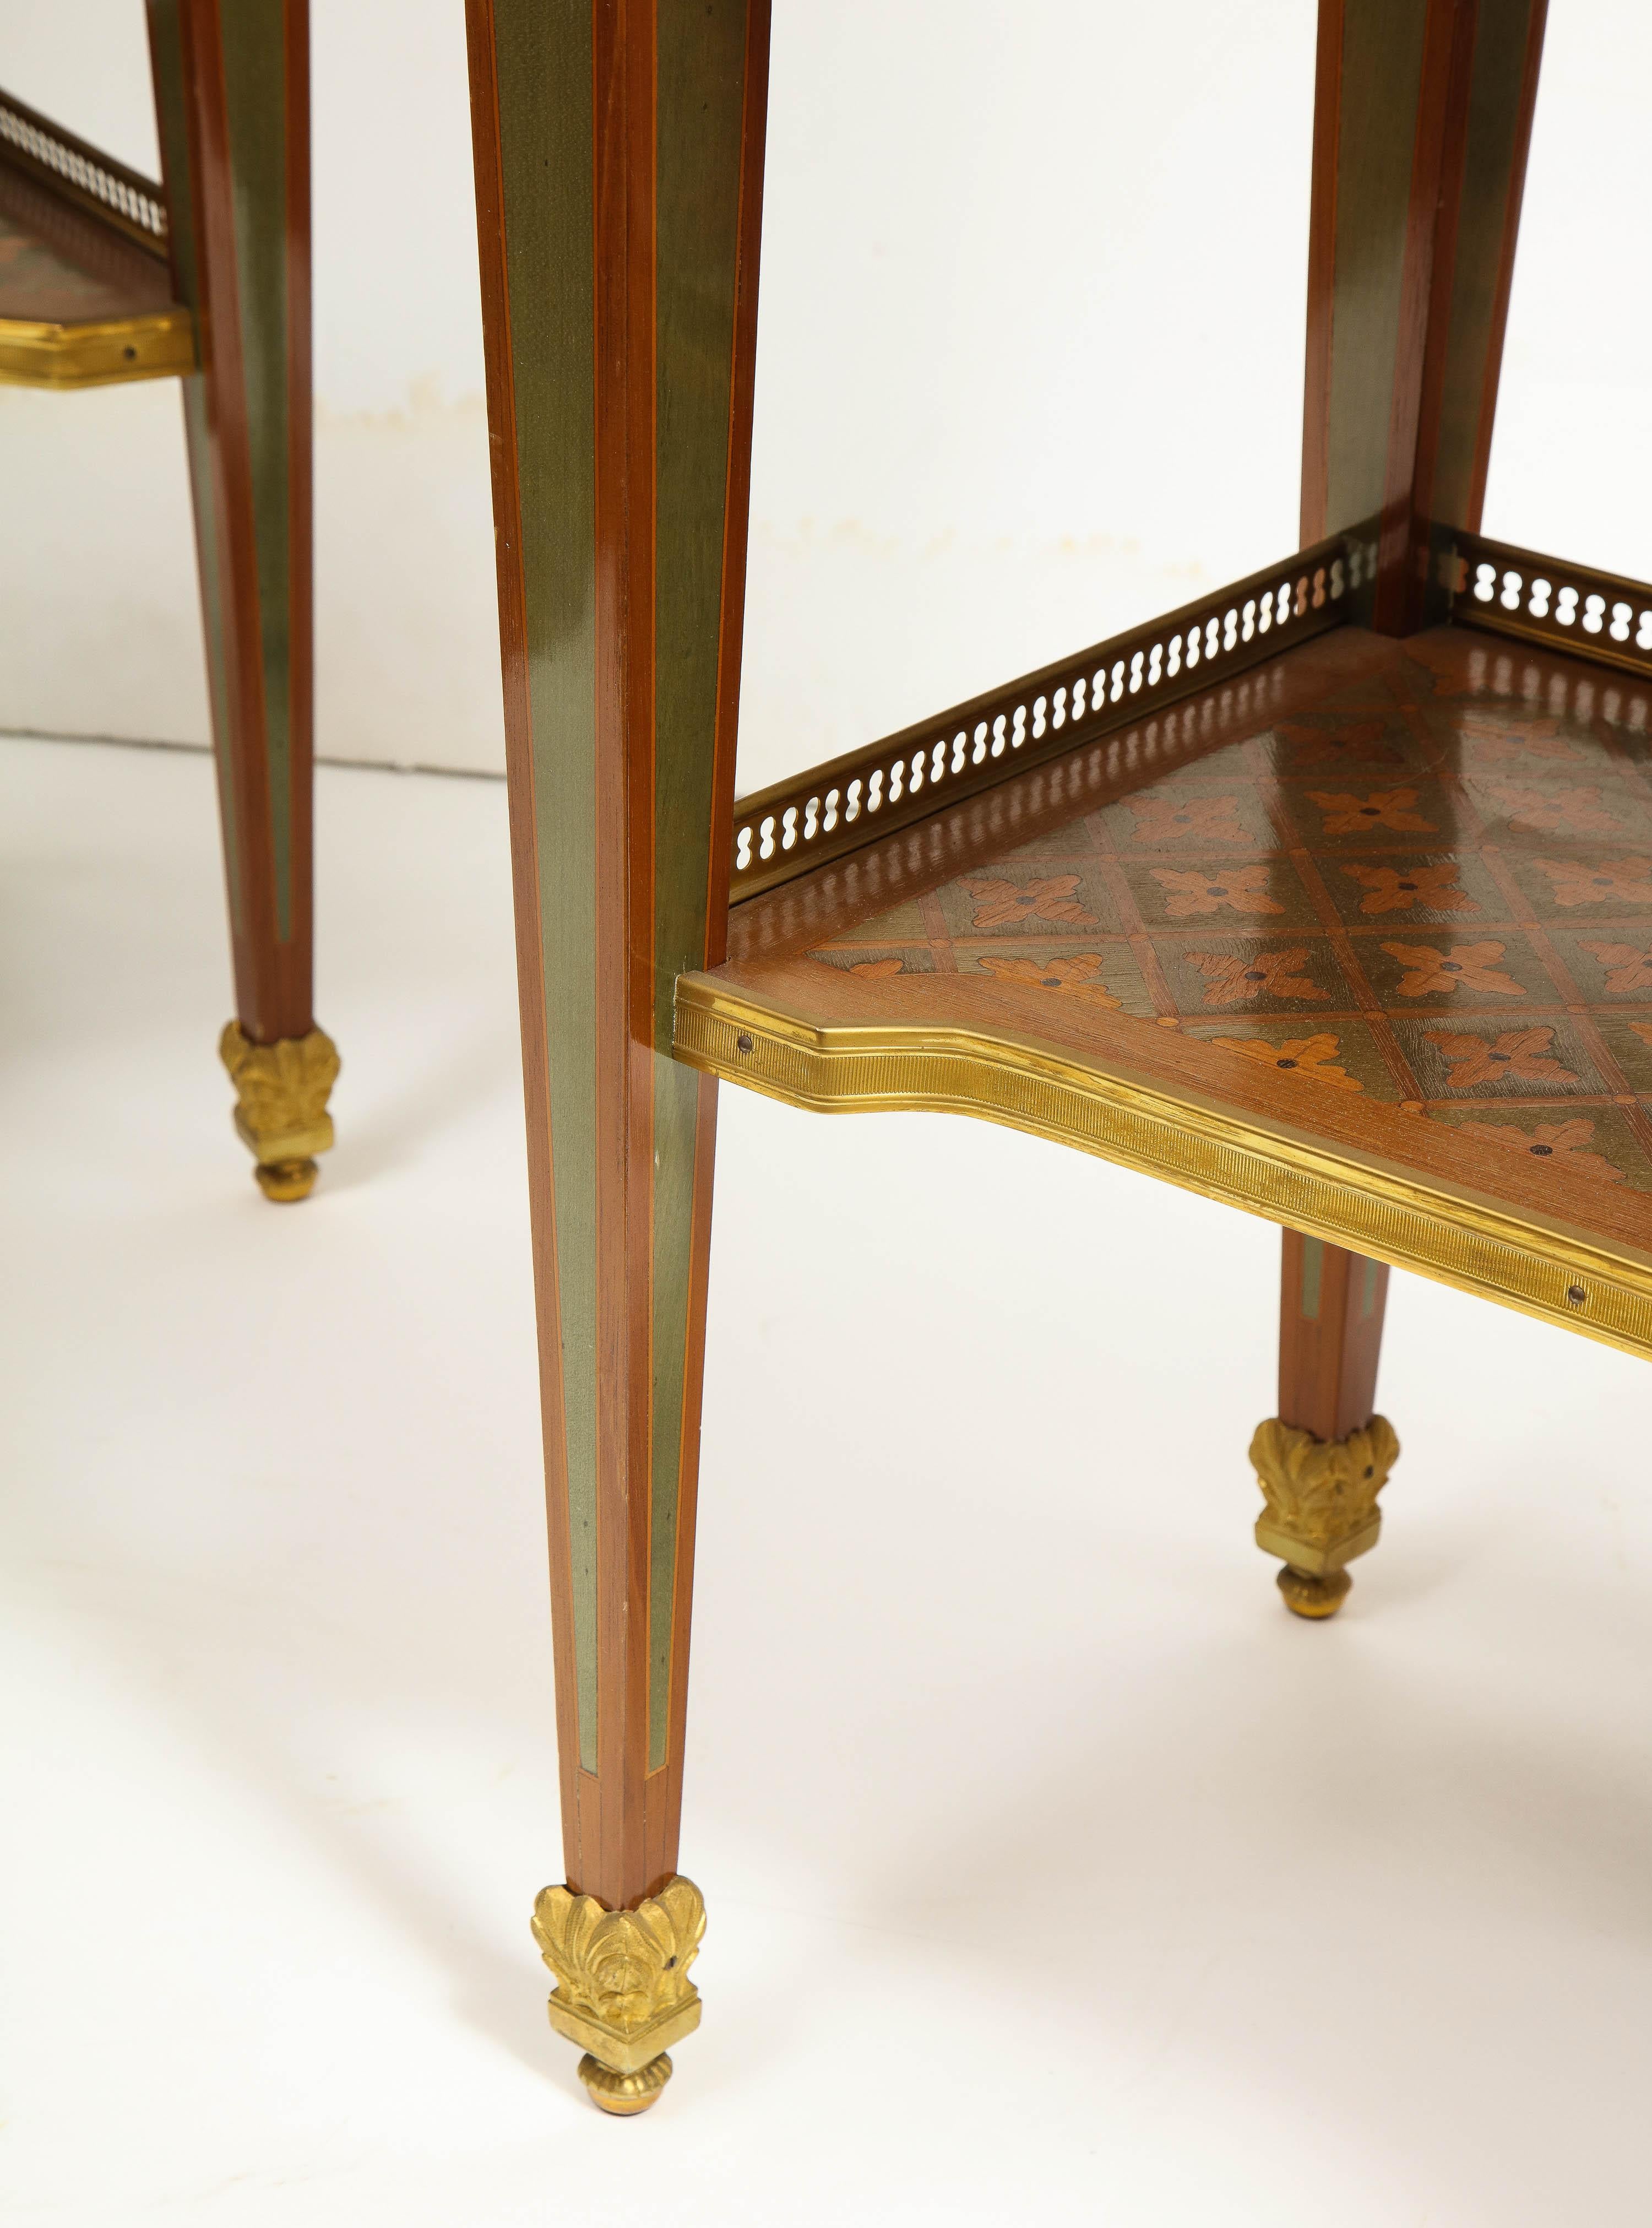 Exceptional Pair of French Ormolu-Mounted Parquetry and Marquetry Side Tables For Sale 2